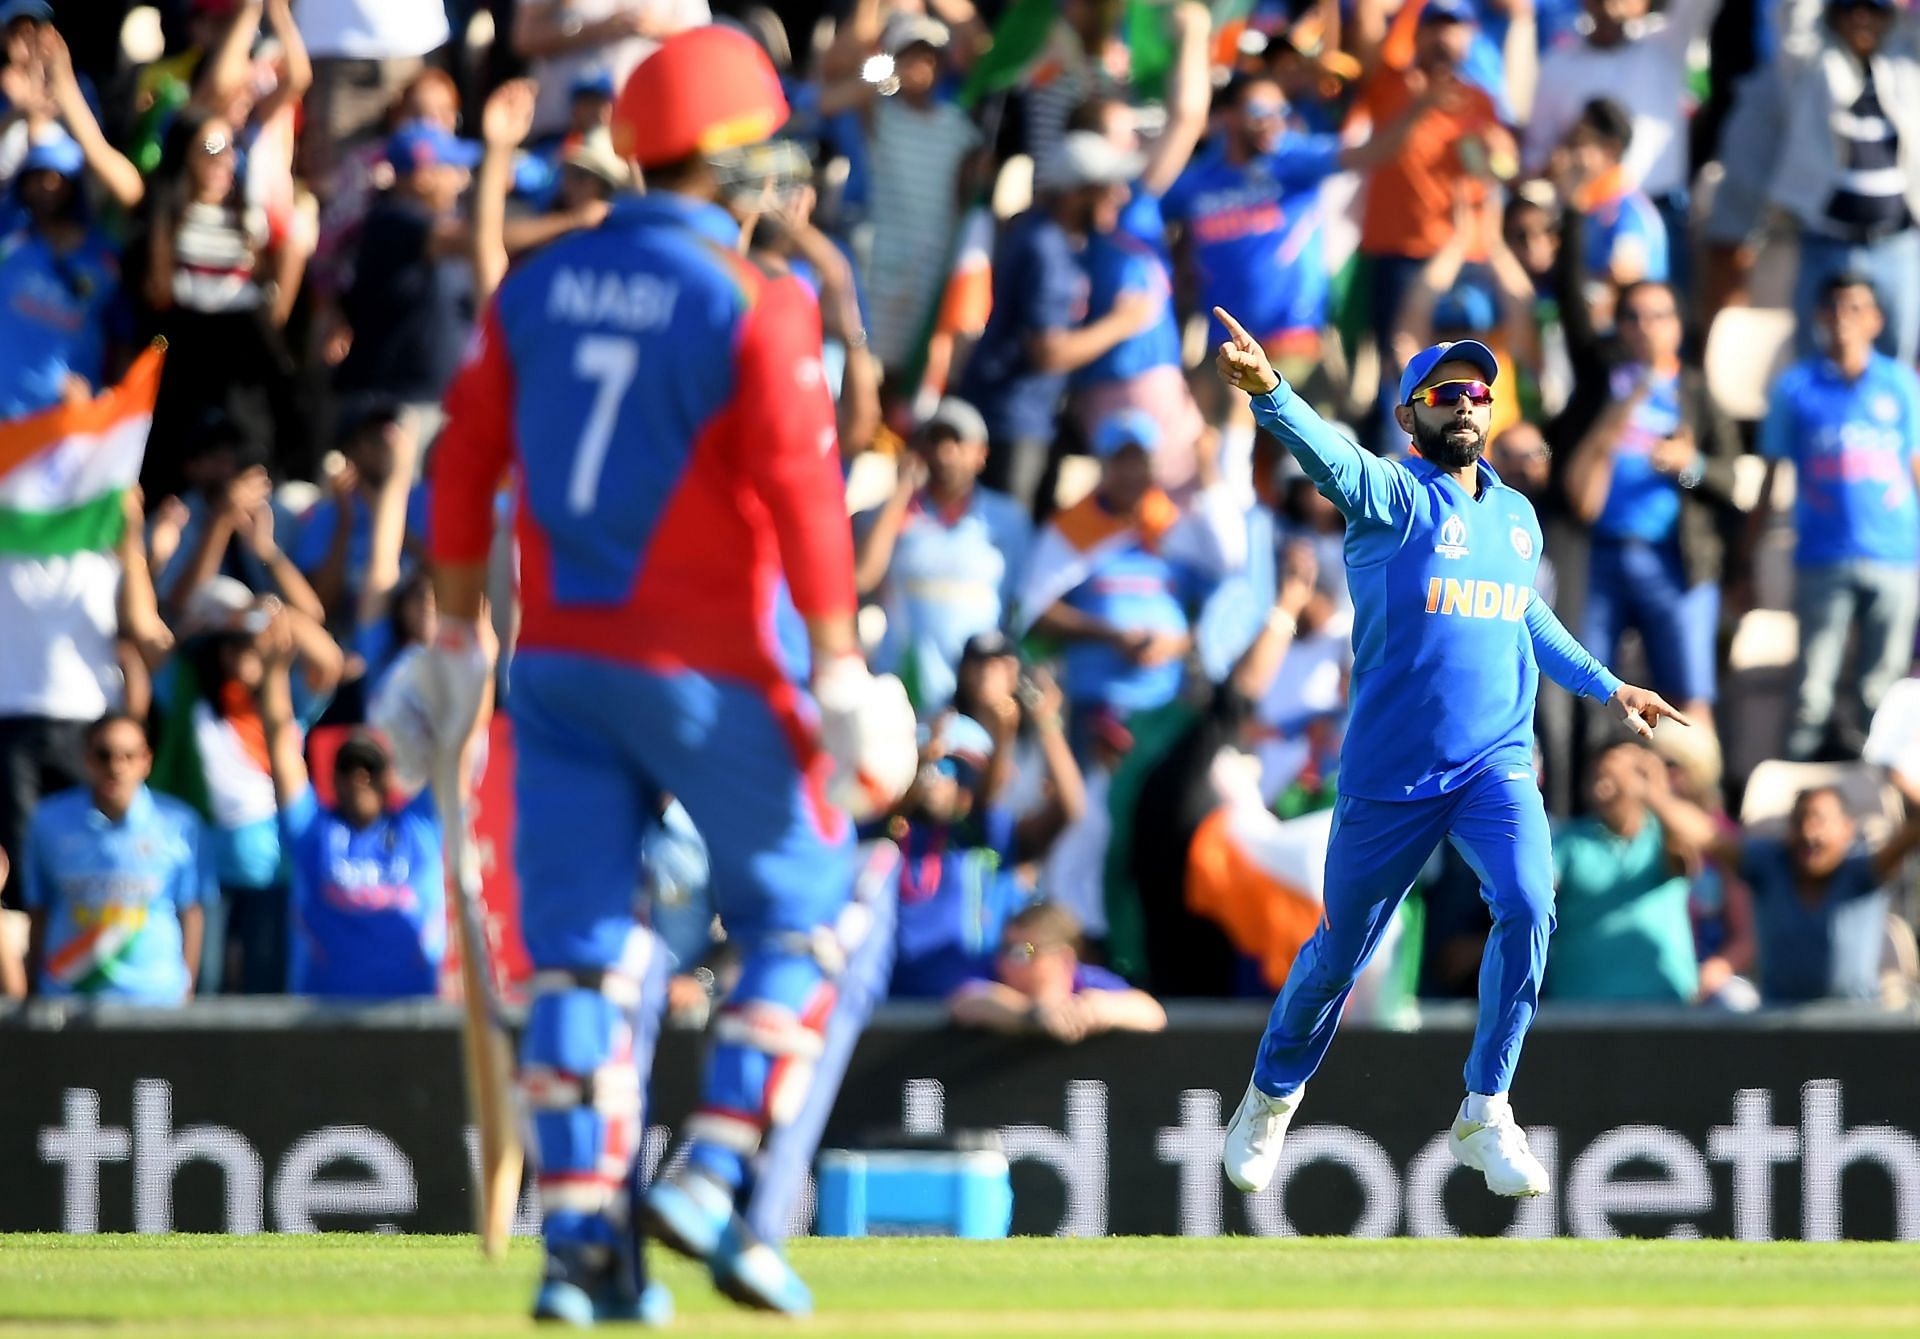 India and Afghanistan will battle it out in the ICC T20 World Cup 2021 on Wednesday, November 3